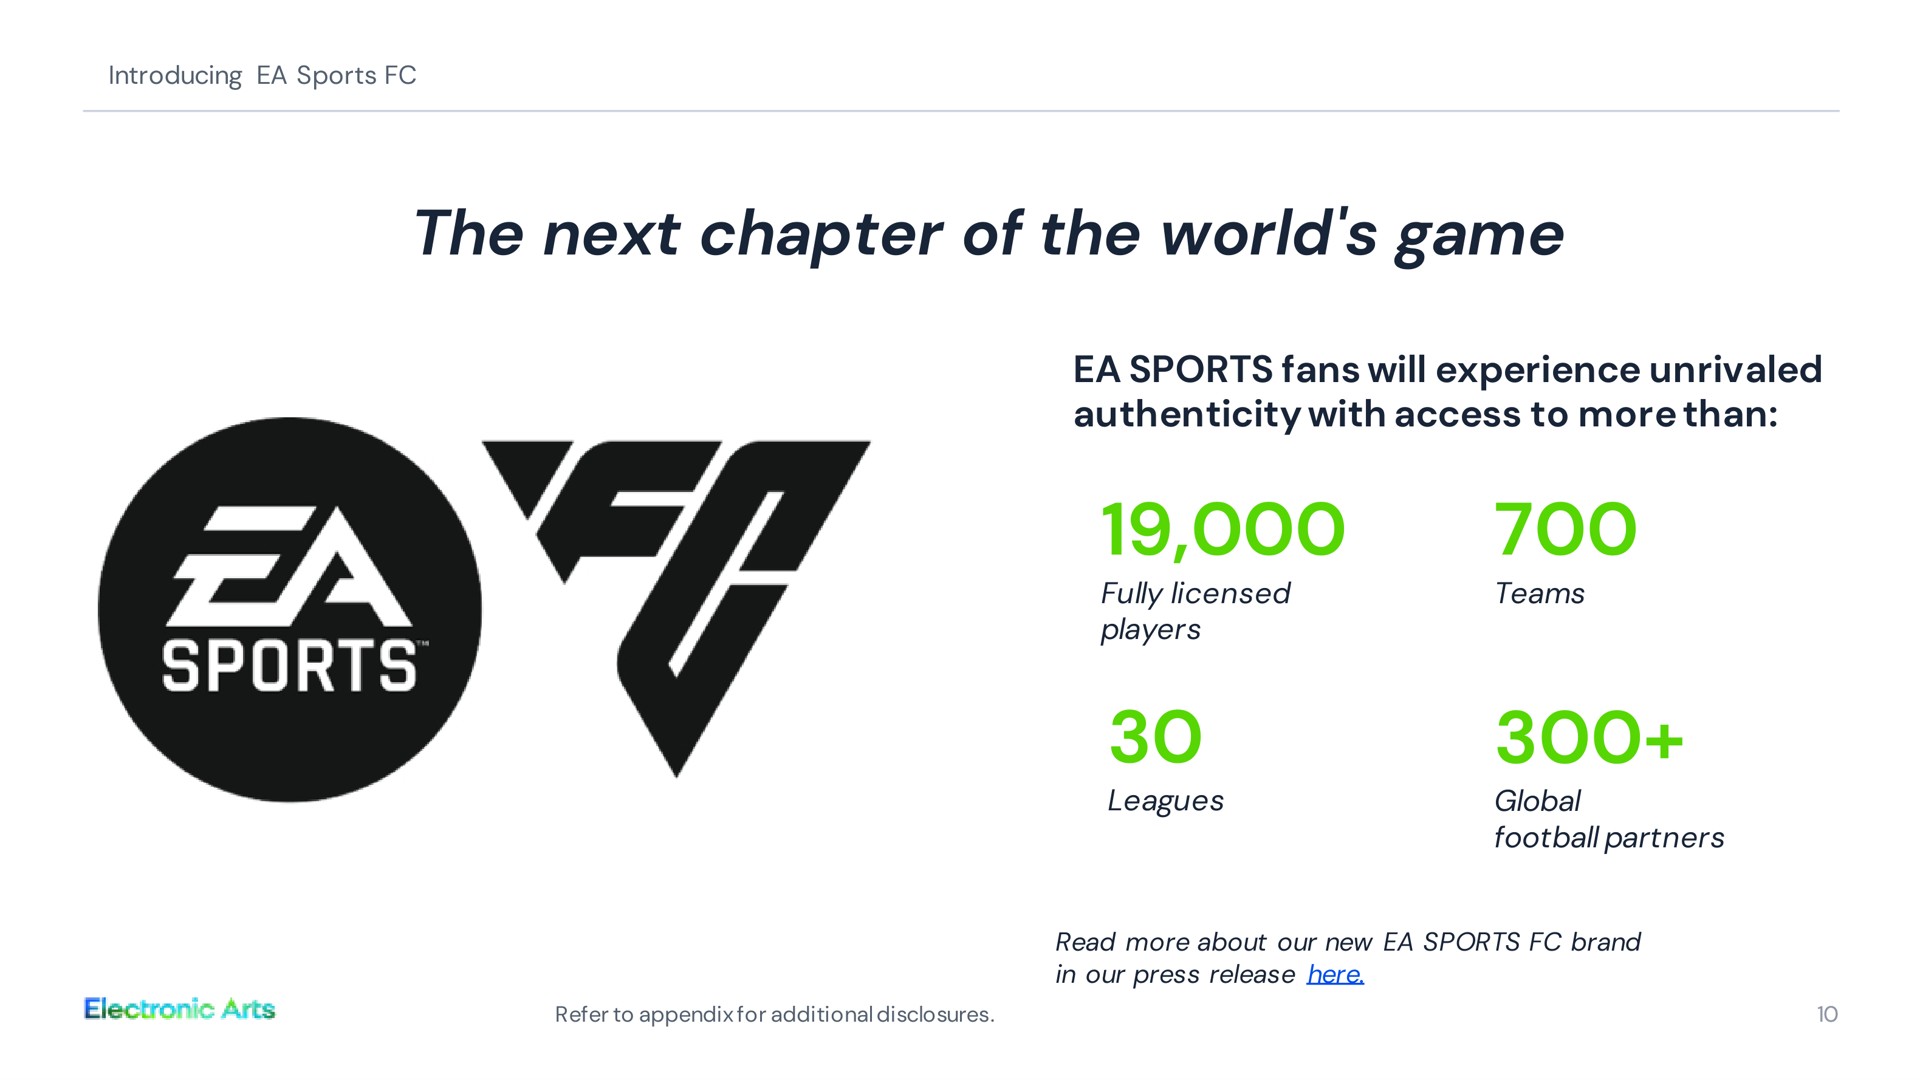 introducing sports the next chapter of the world game sports fans will experience unrivaled authenticity with access to more than fully licensed players teams leagues global football partners read more about our new sports brand in our press release here | Electronic Arts